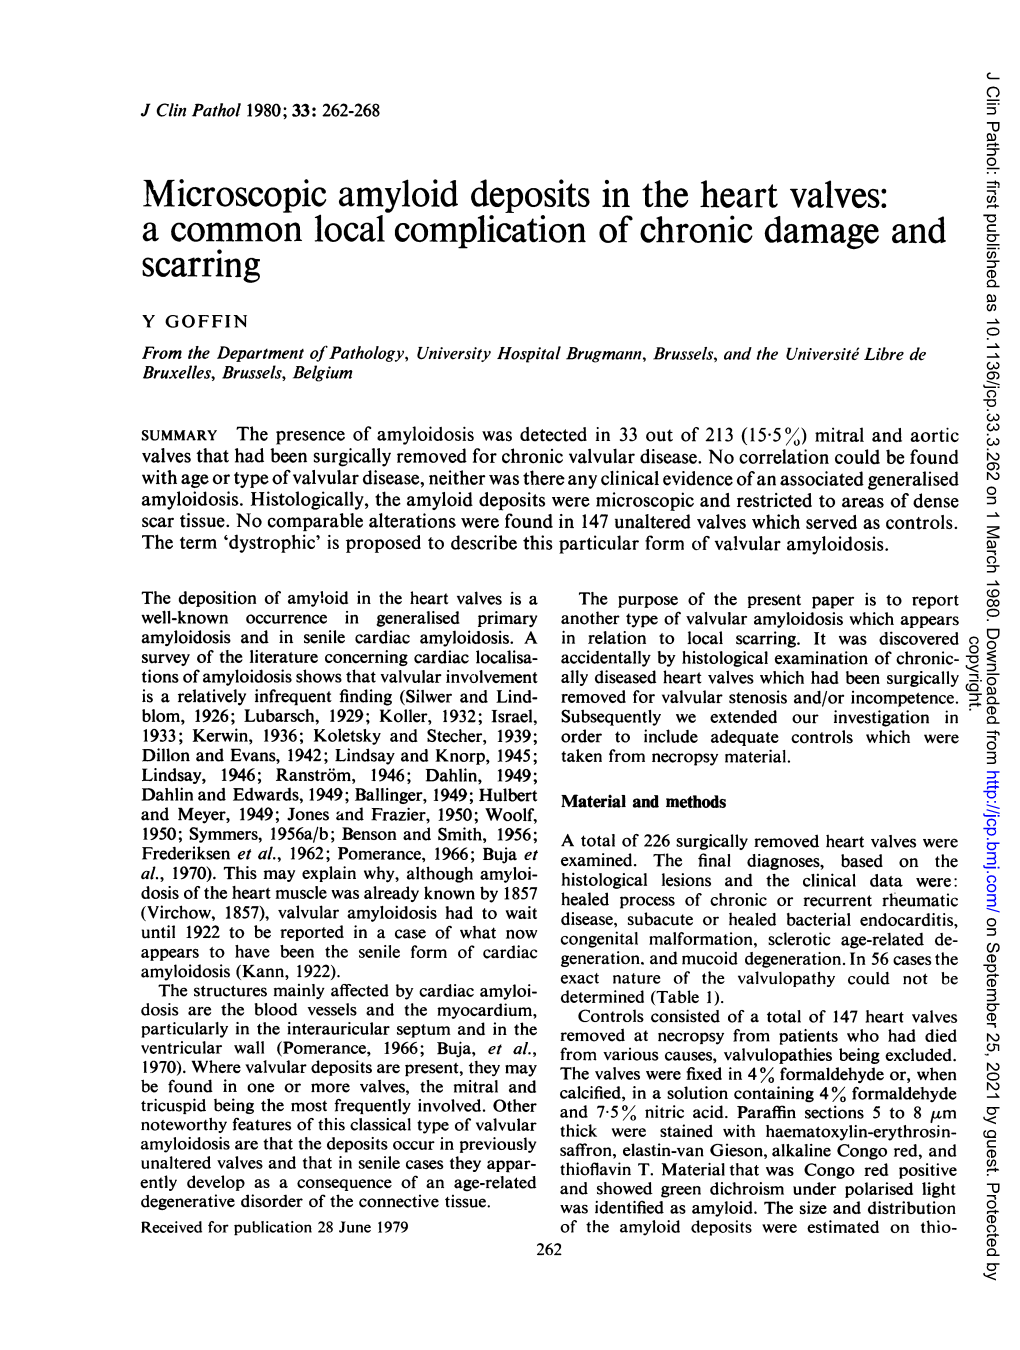 Microscopic Amyloid Deposits in the Heart Valves: a Common Local Complication of Chronic Damage and Scarring